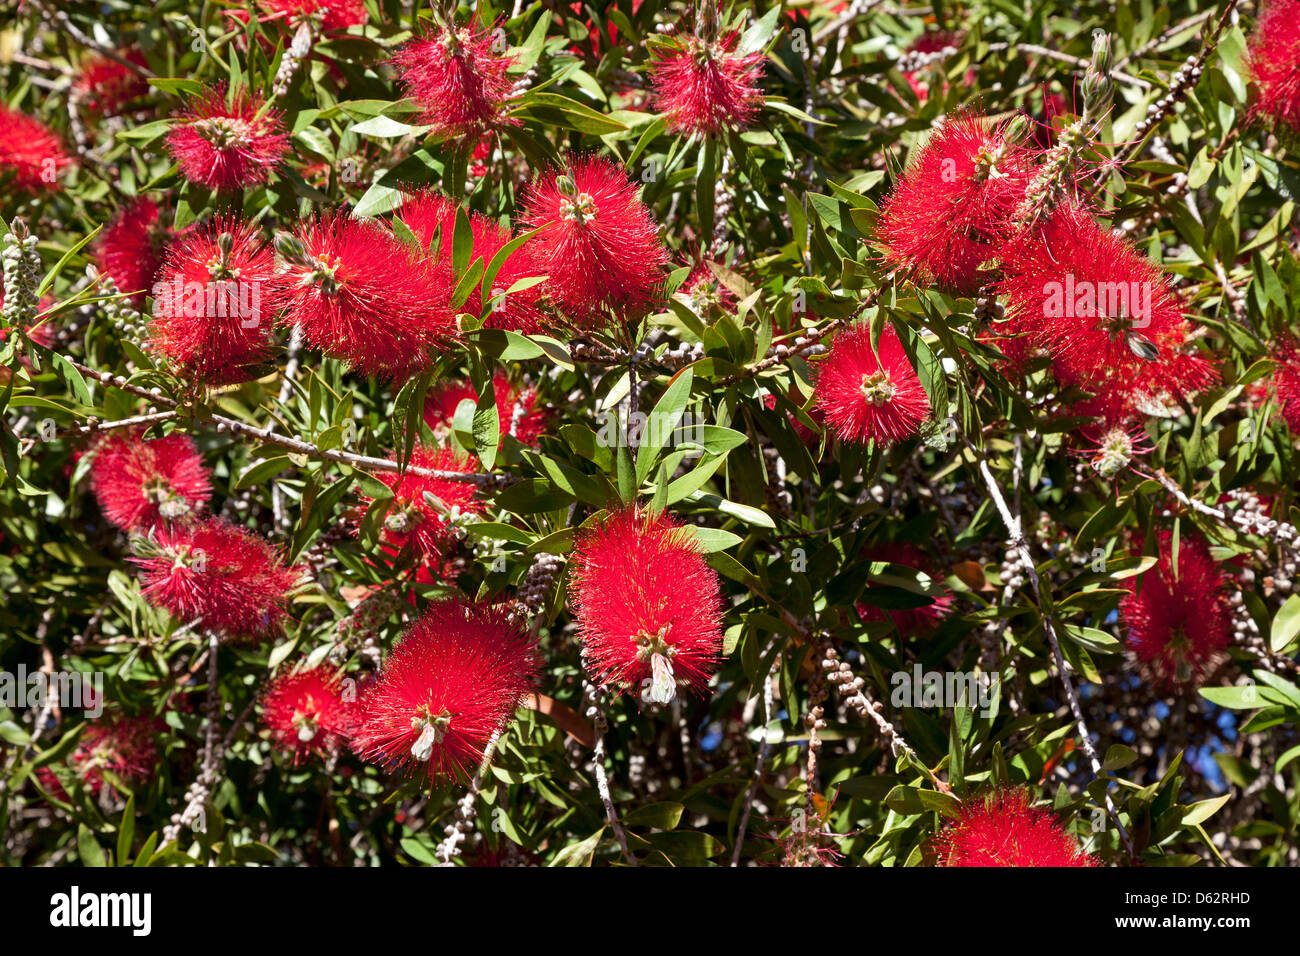 Red Flowers Of The Pohutukawa Tree In New Zealand Stock Photo Alamy